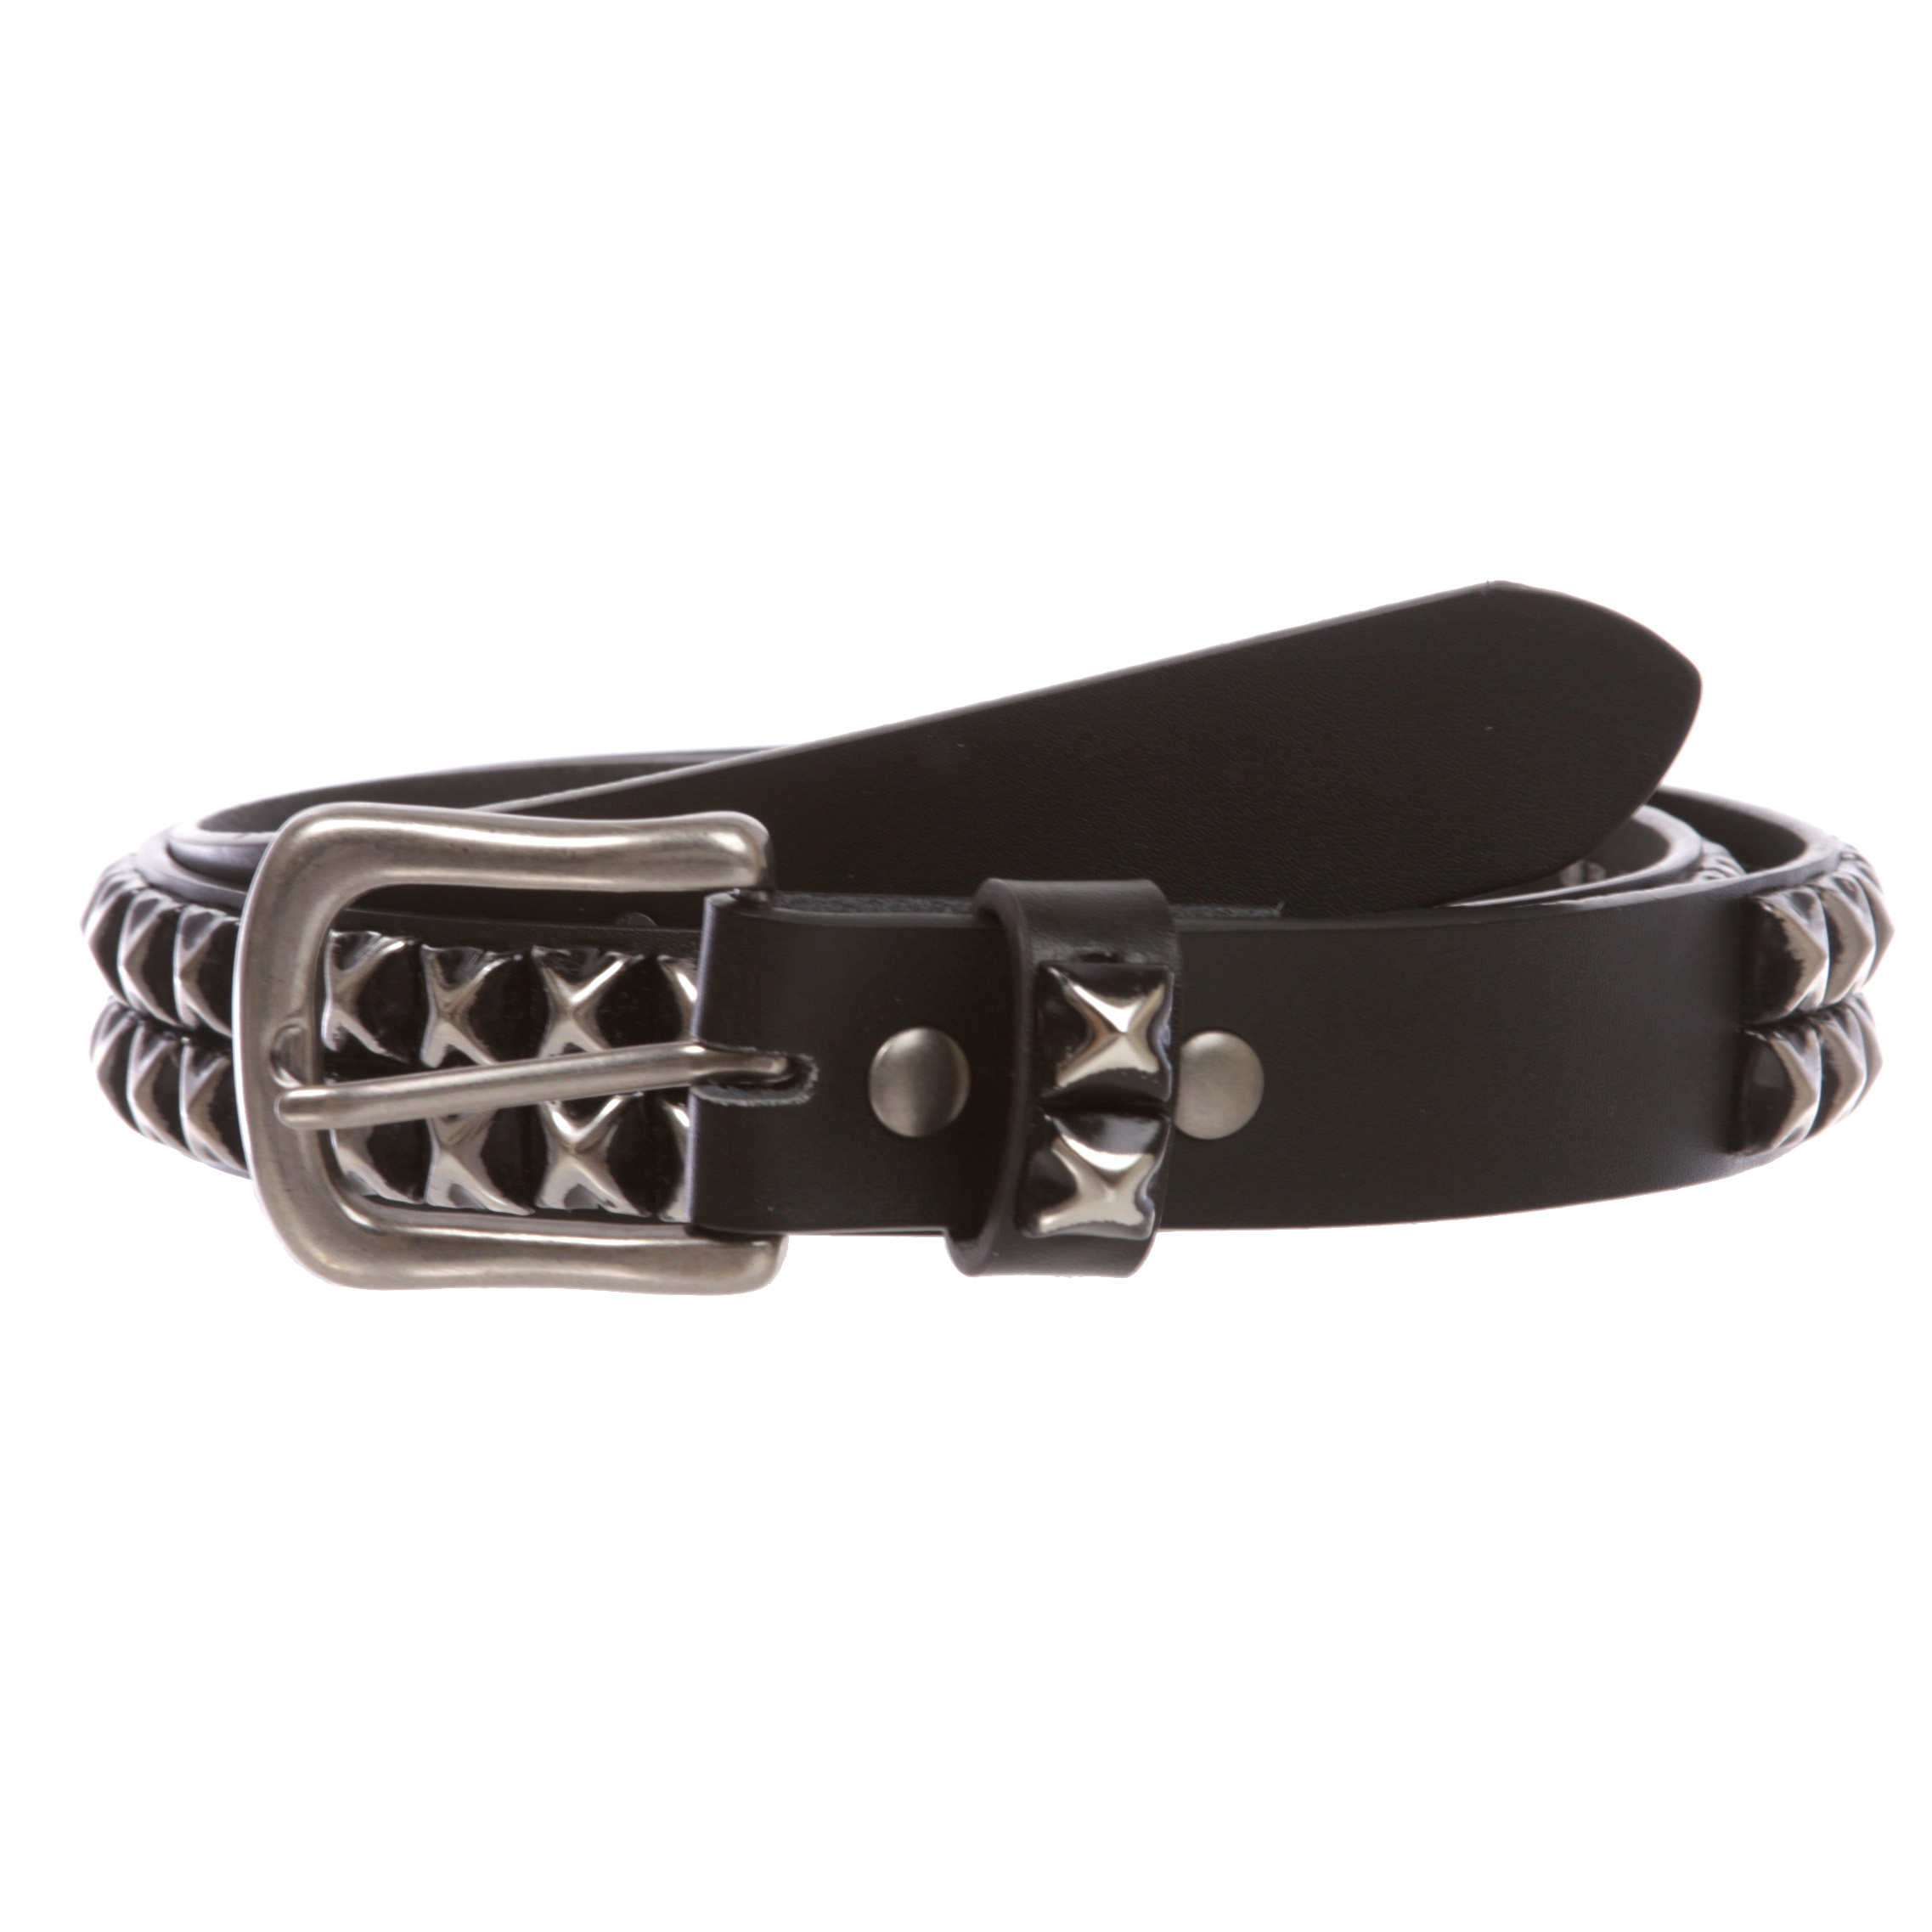 Snap On Two Row Punk Rock Star Distressed Black Studded Leather Belt - image 2 of 5